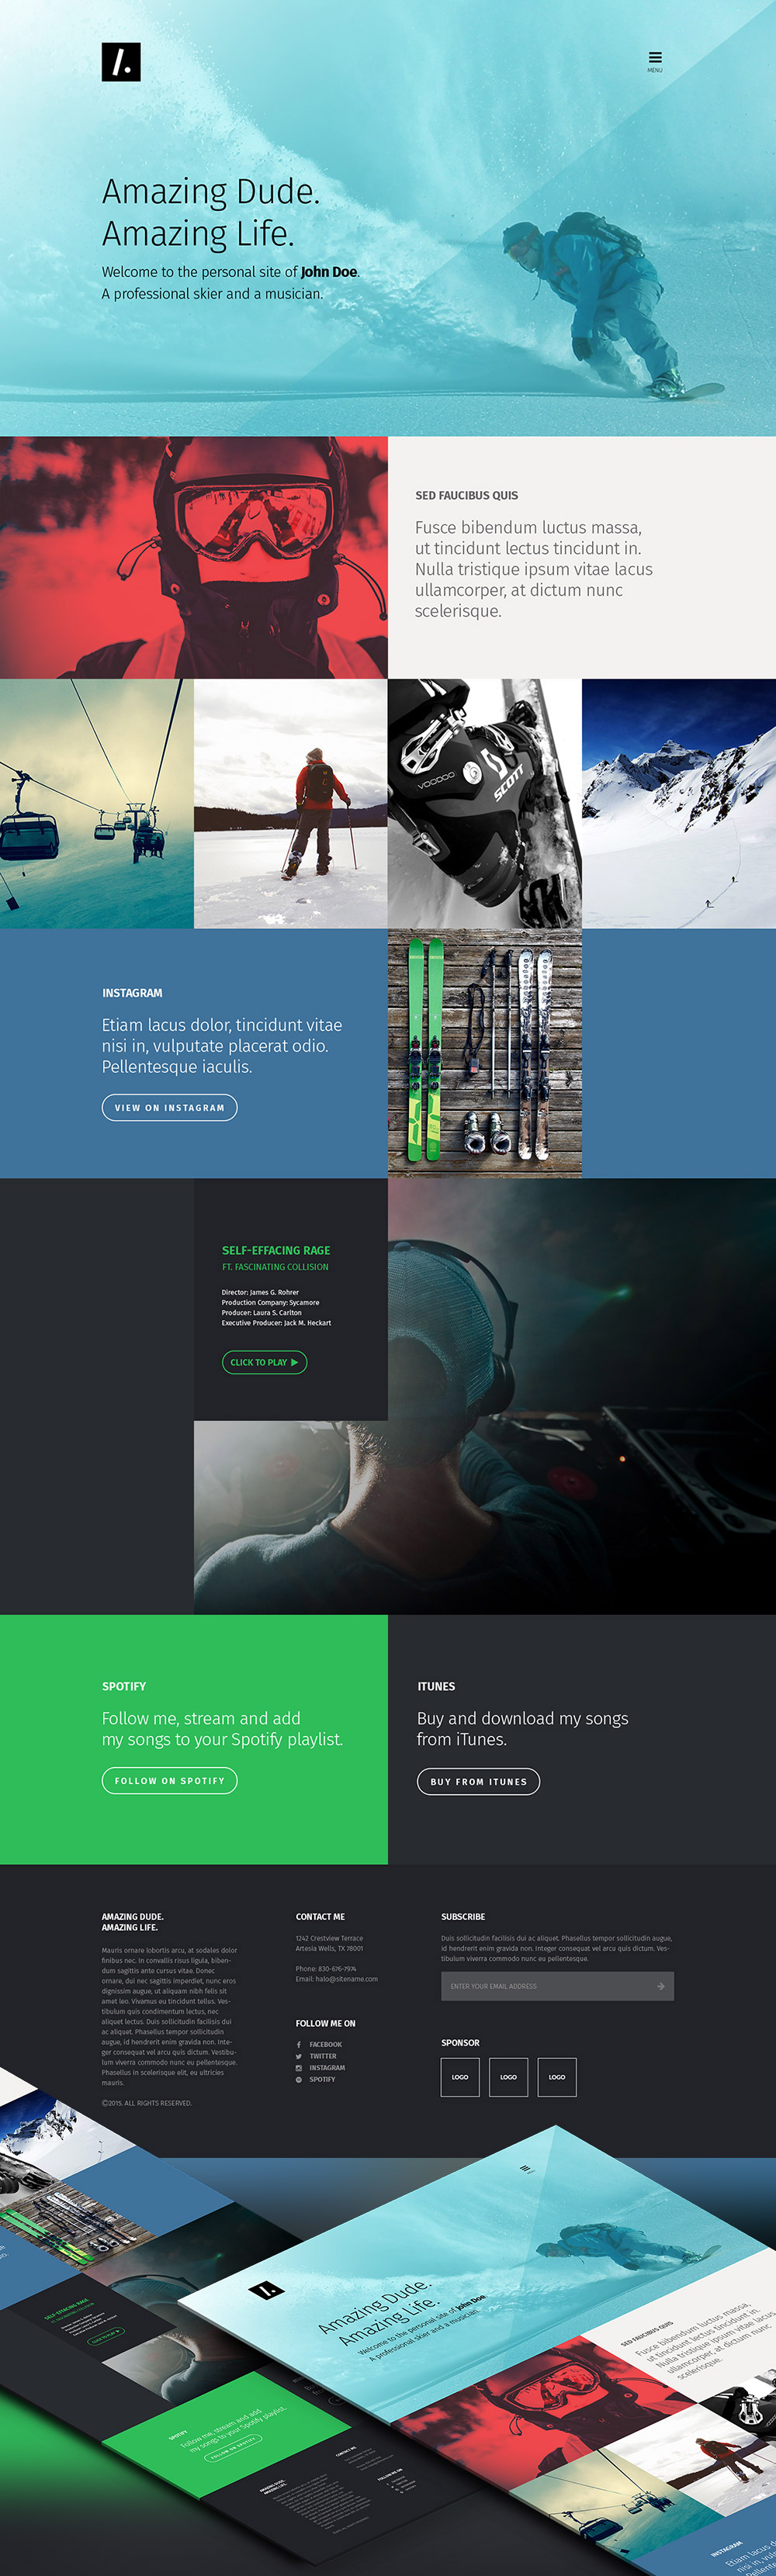 one-page-personal-portfolio-website-template-free-psd-download-psd